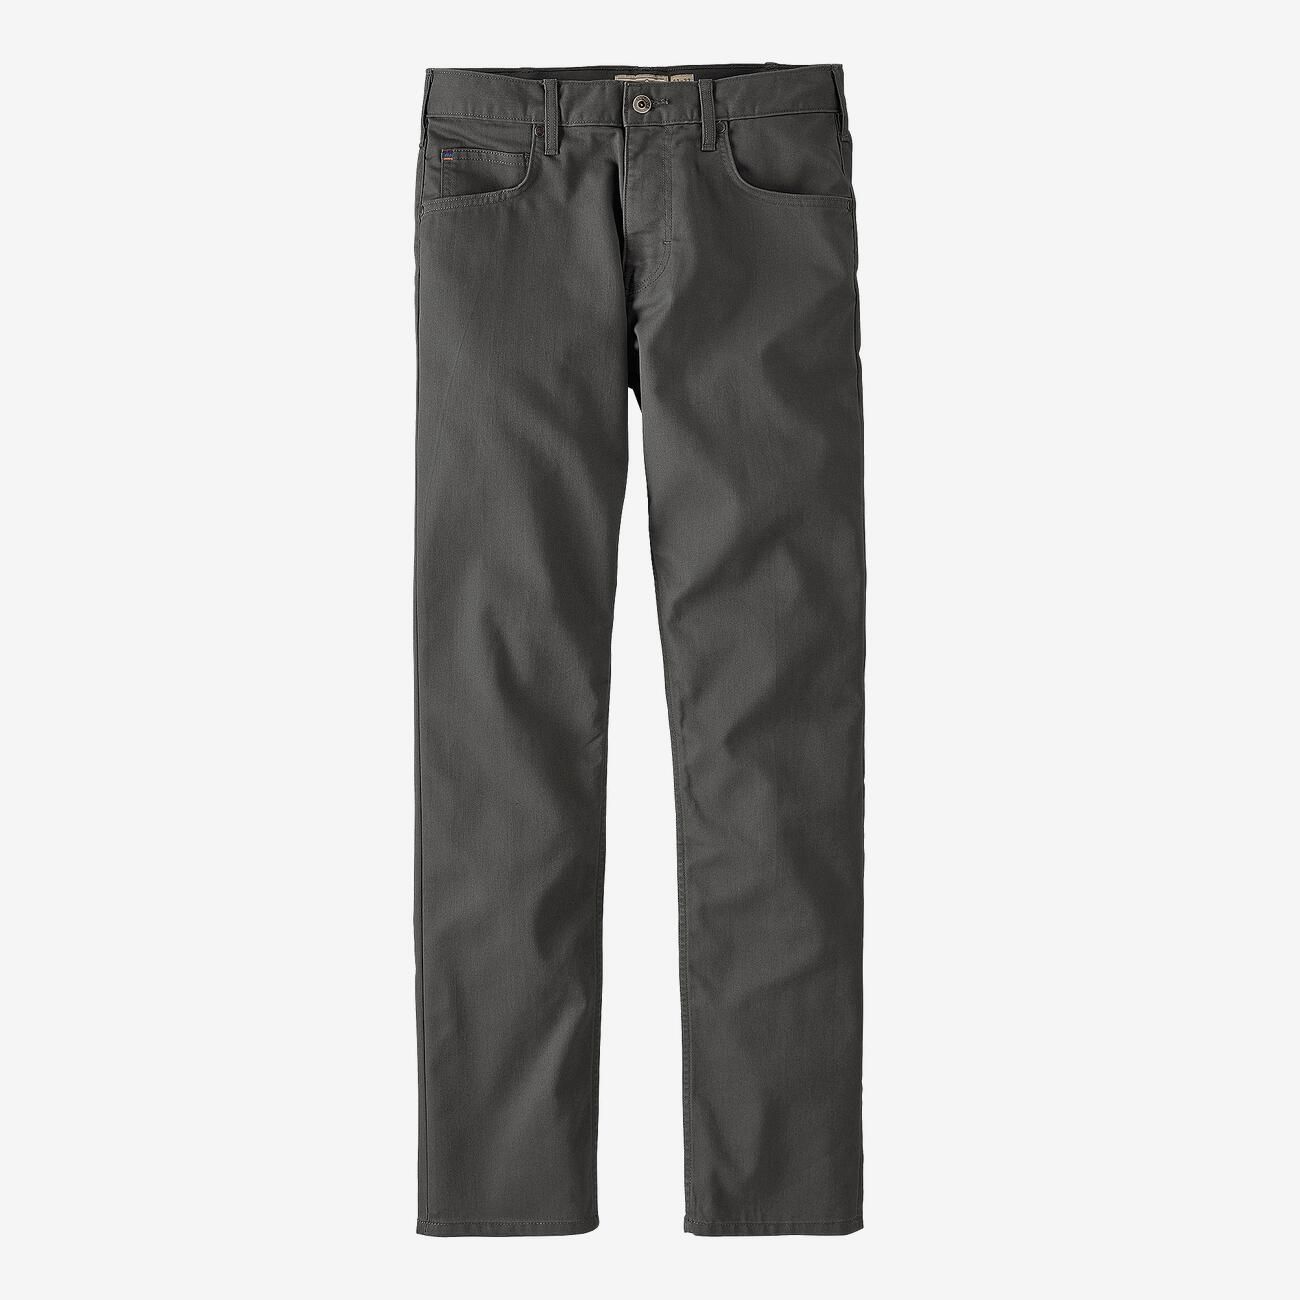 Jeans Men's Performance Twill Jeans - Forge Grey